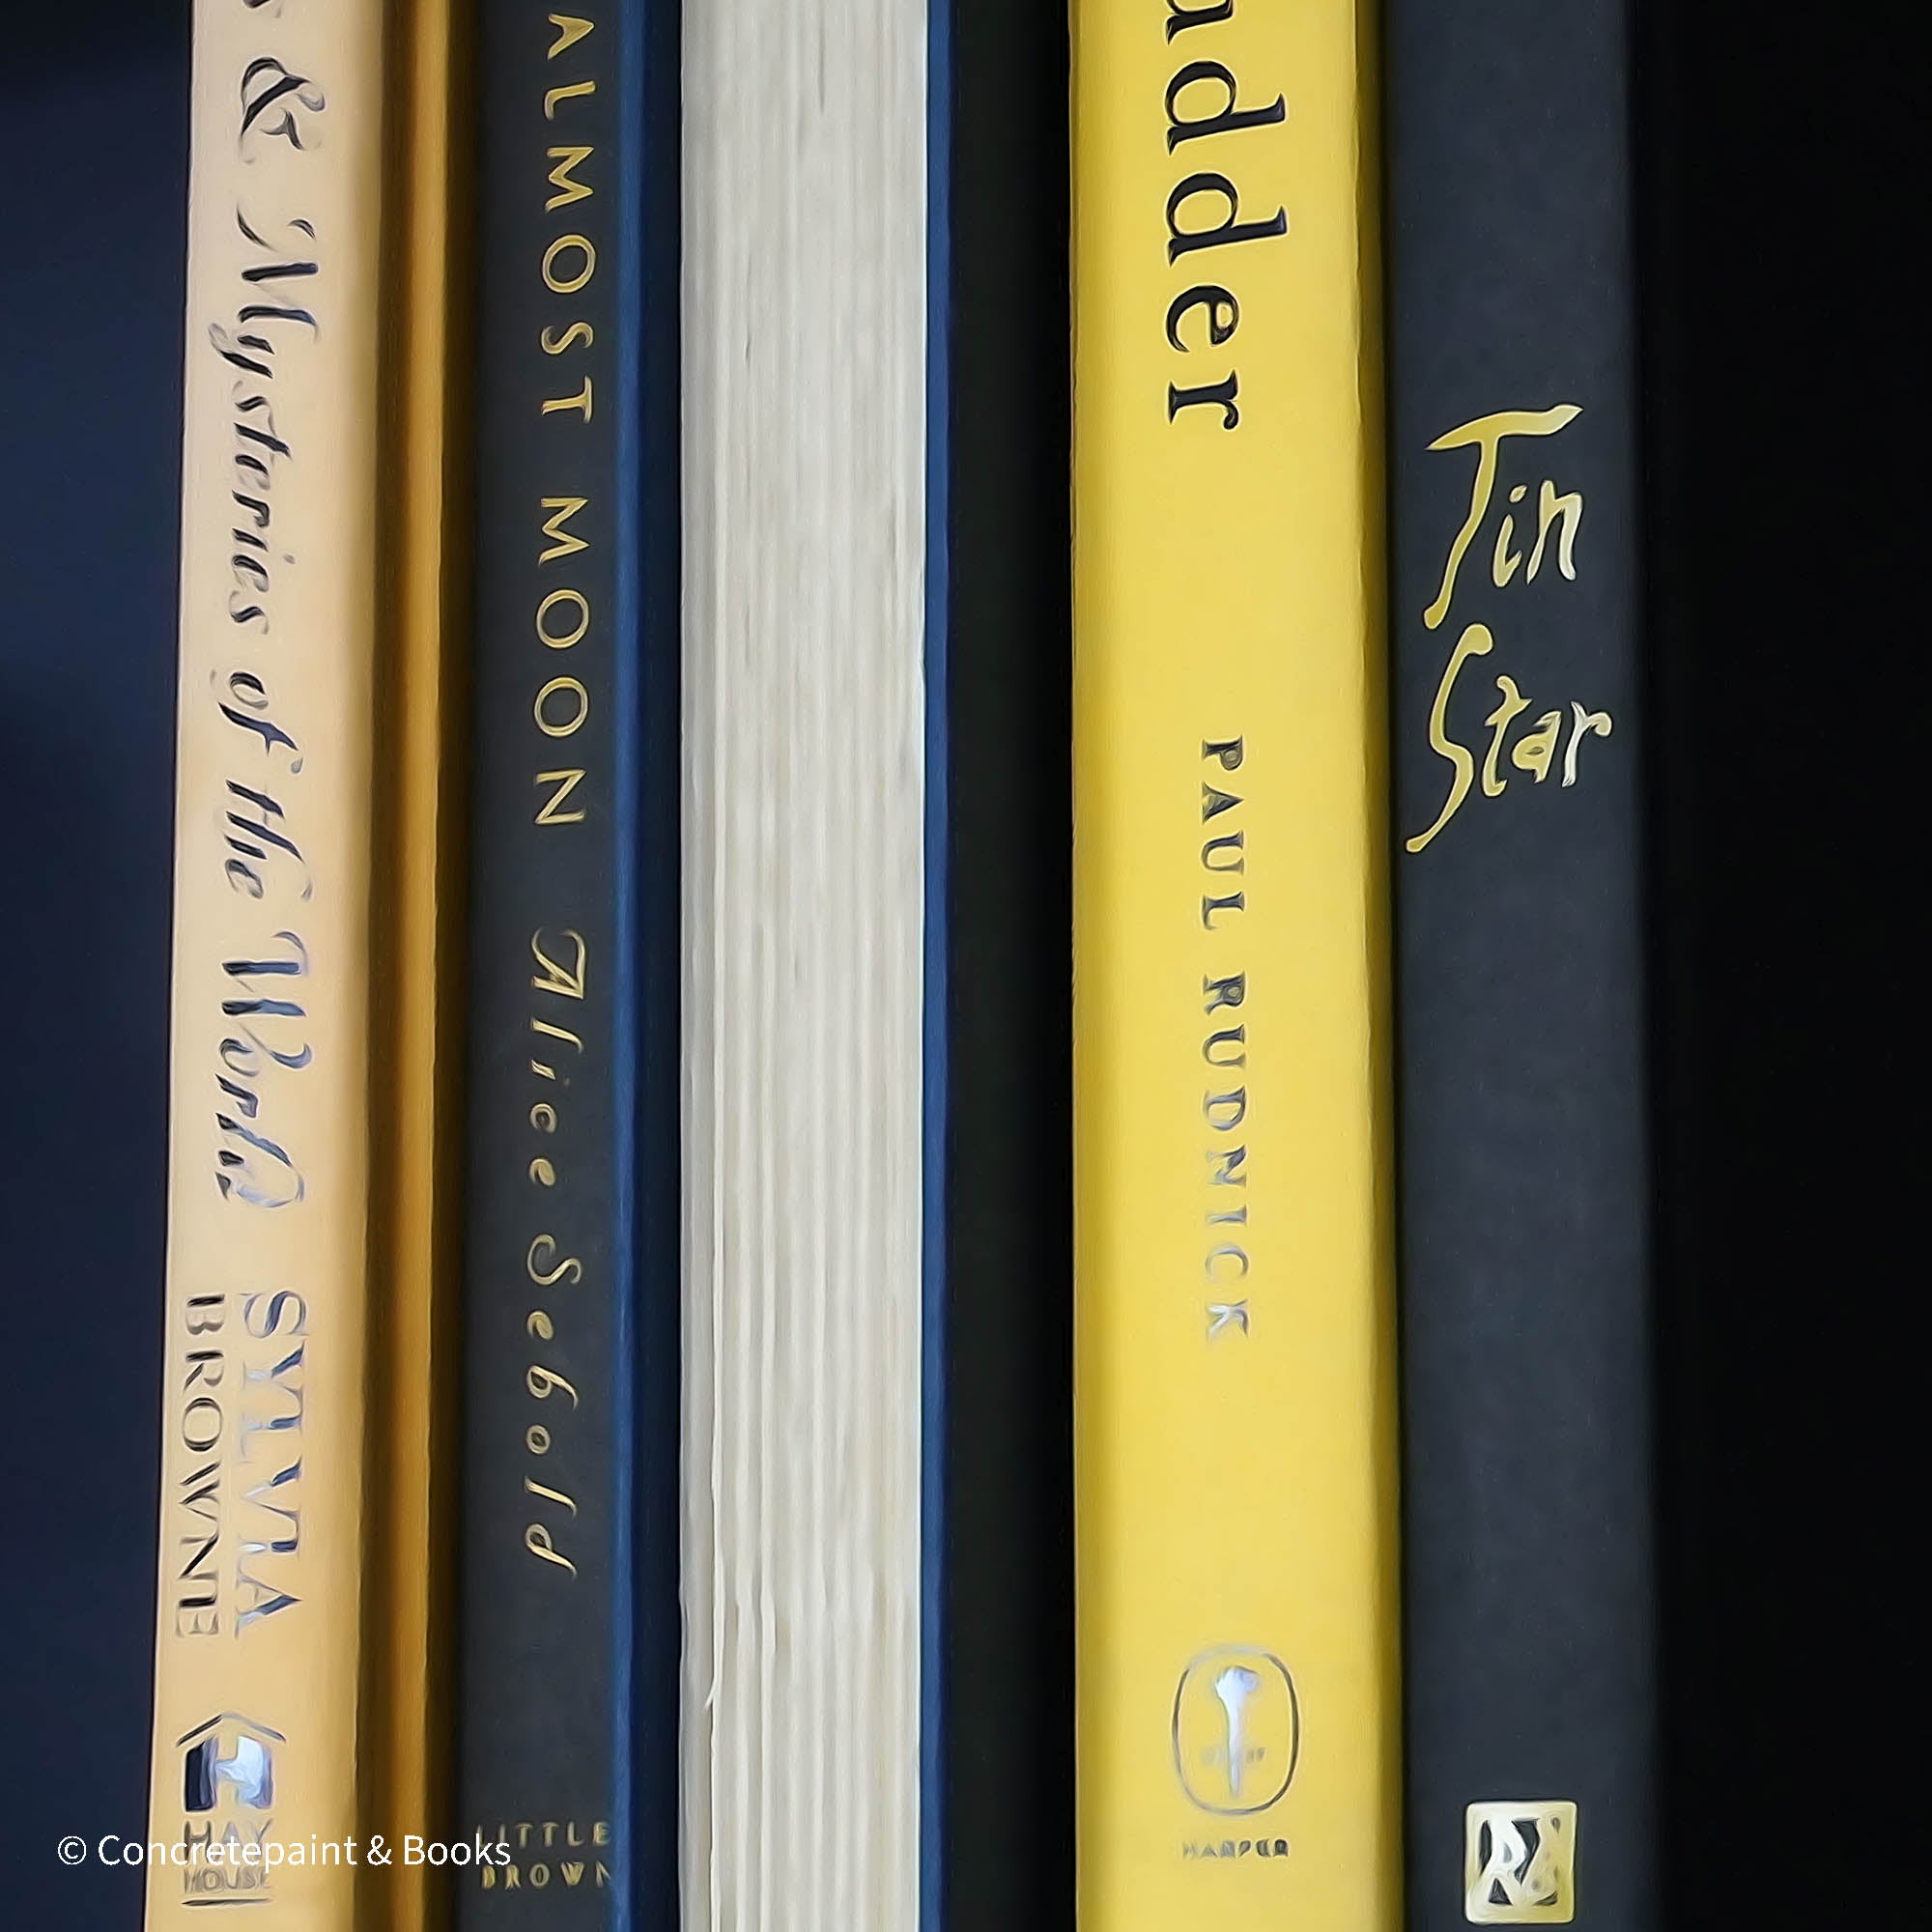 Blue and yellow book used for shelf decoration. Hardcover books for decor.